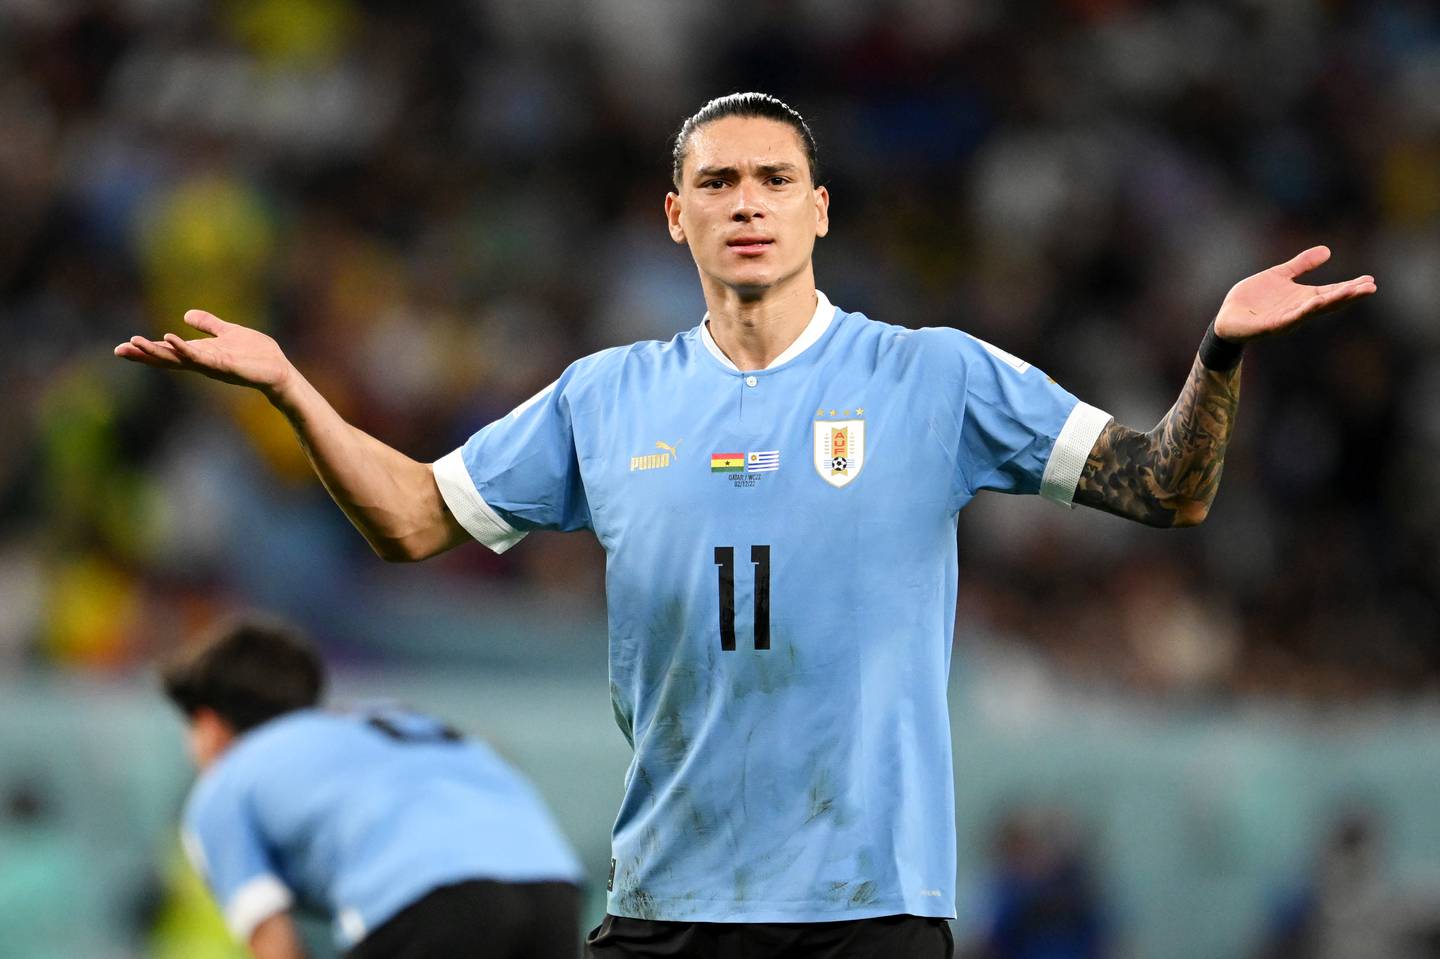 Darwin Nunez is set to join the Liverpool squad in Dubai as a result of Uruguay's group-stage exit at the World Cup. Getty